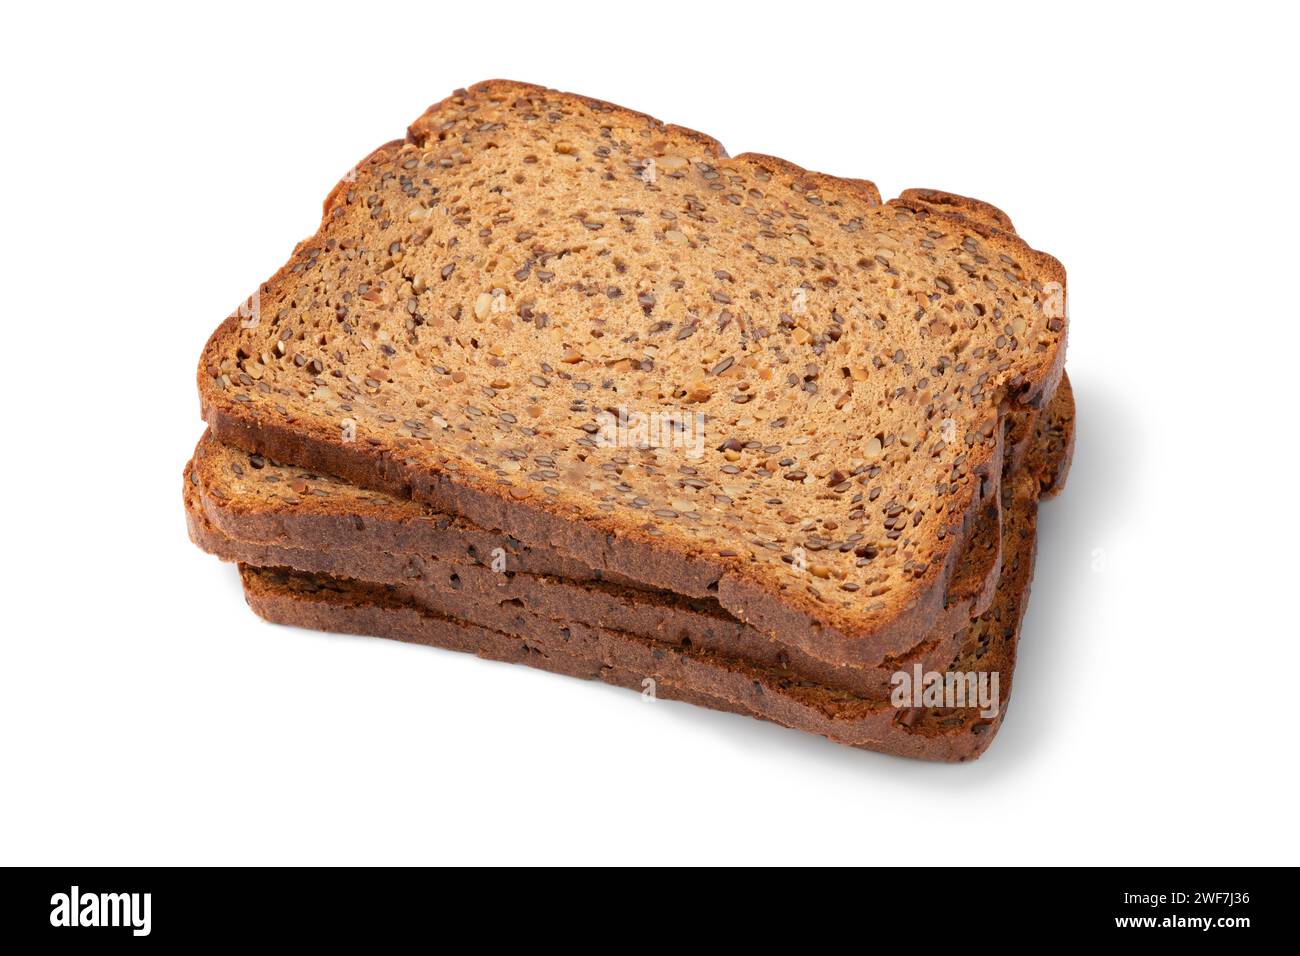 Thin slices of fresh baked brown flaxseed bread close up isolated on white background Stock Photo